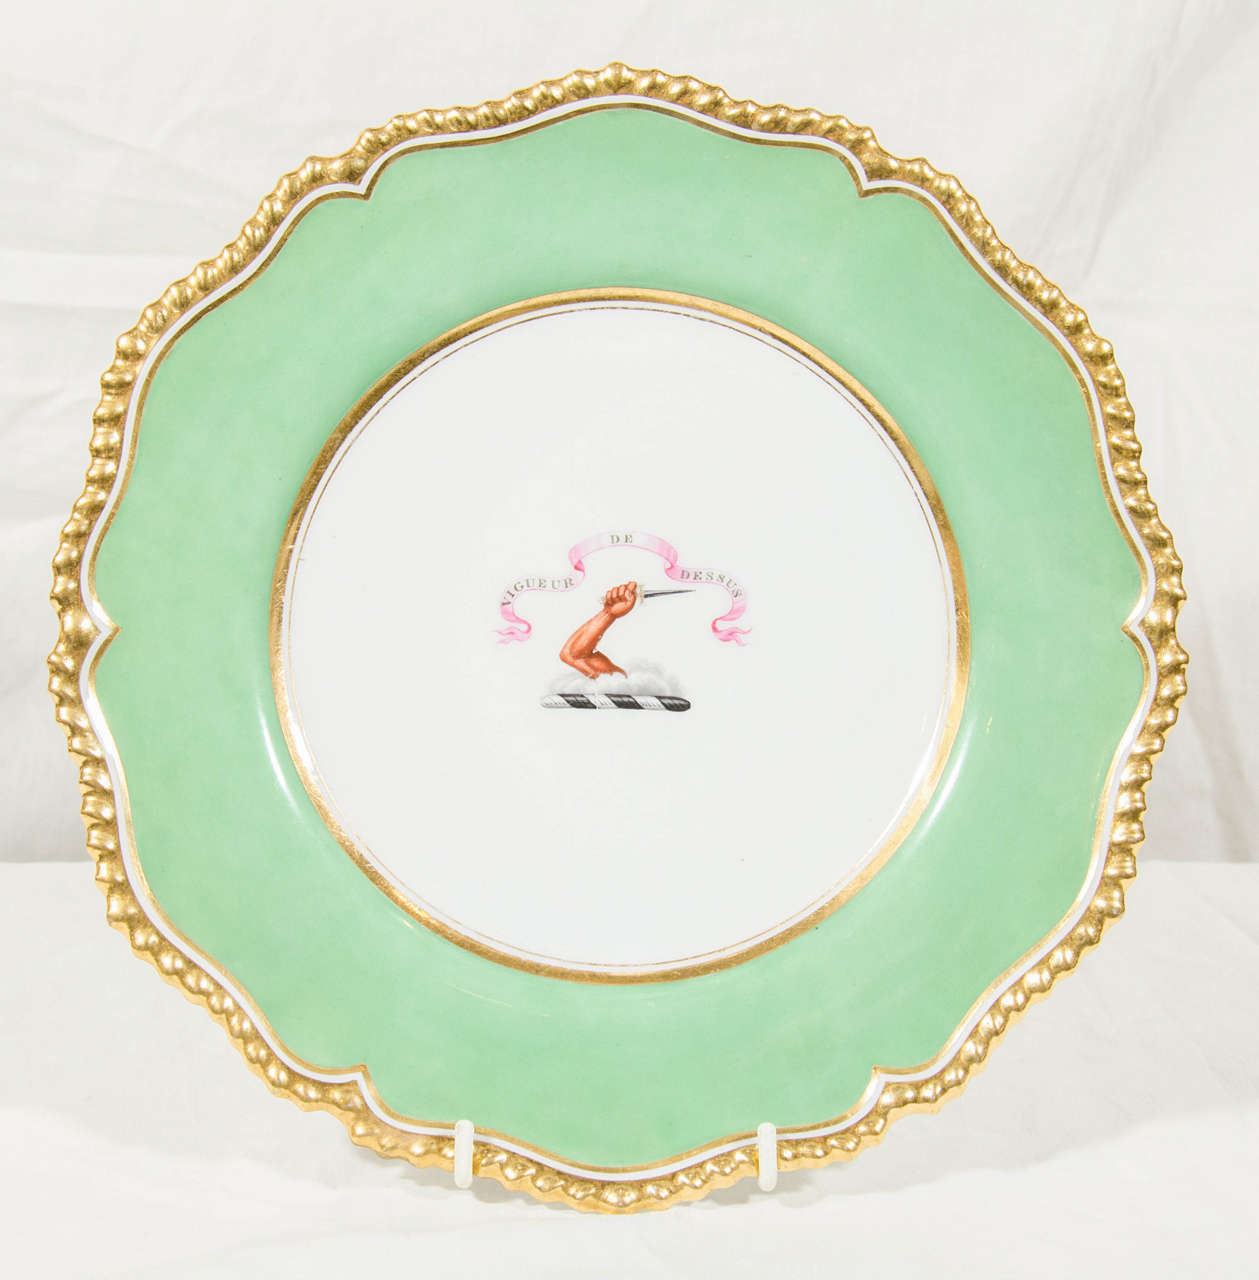 The Crest of O'Brien is at the center of this pair of Flight, Barr & Barr Worcester, George IV, porcelain dishes with apple green borders, and gilded edges. The crest with the motto: Vigueur de Dessus [Strength is from Above]  along with its